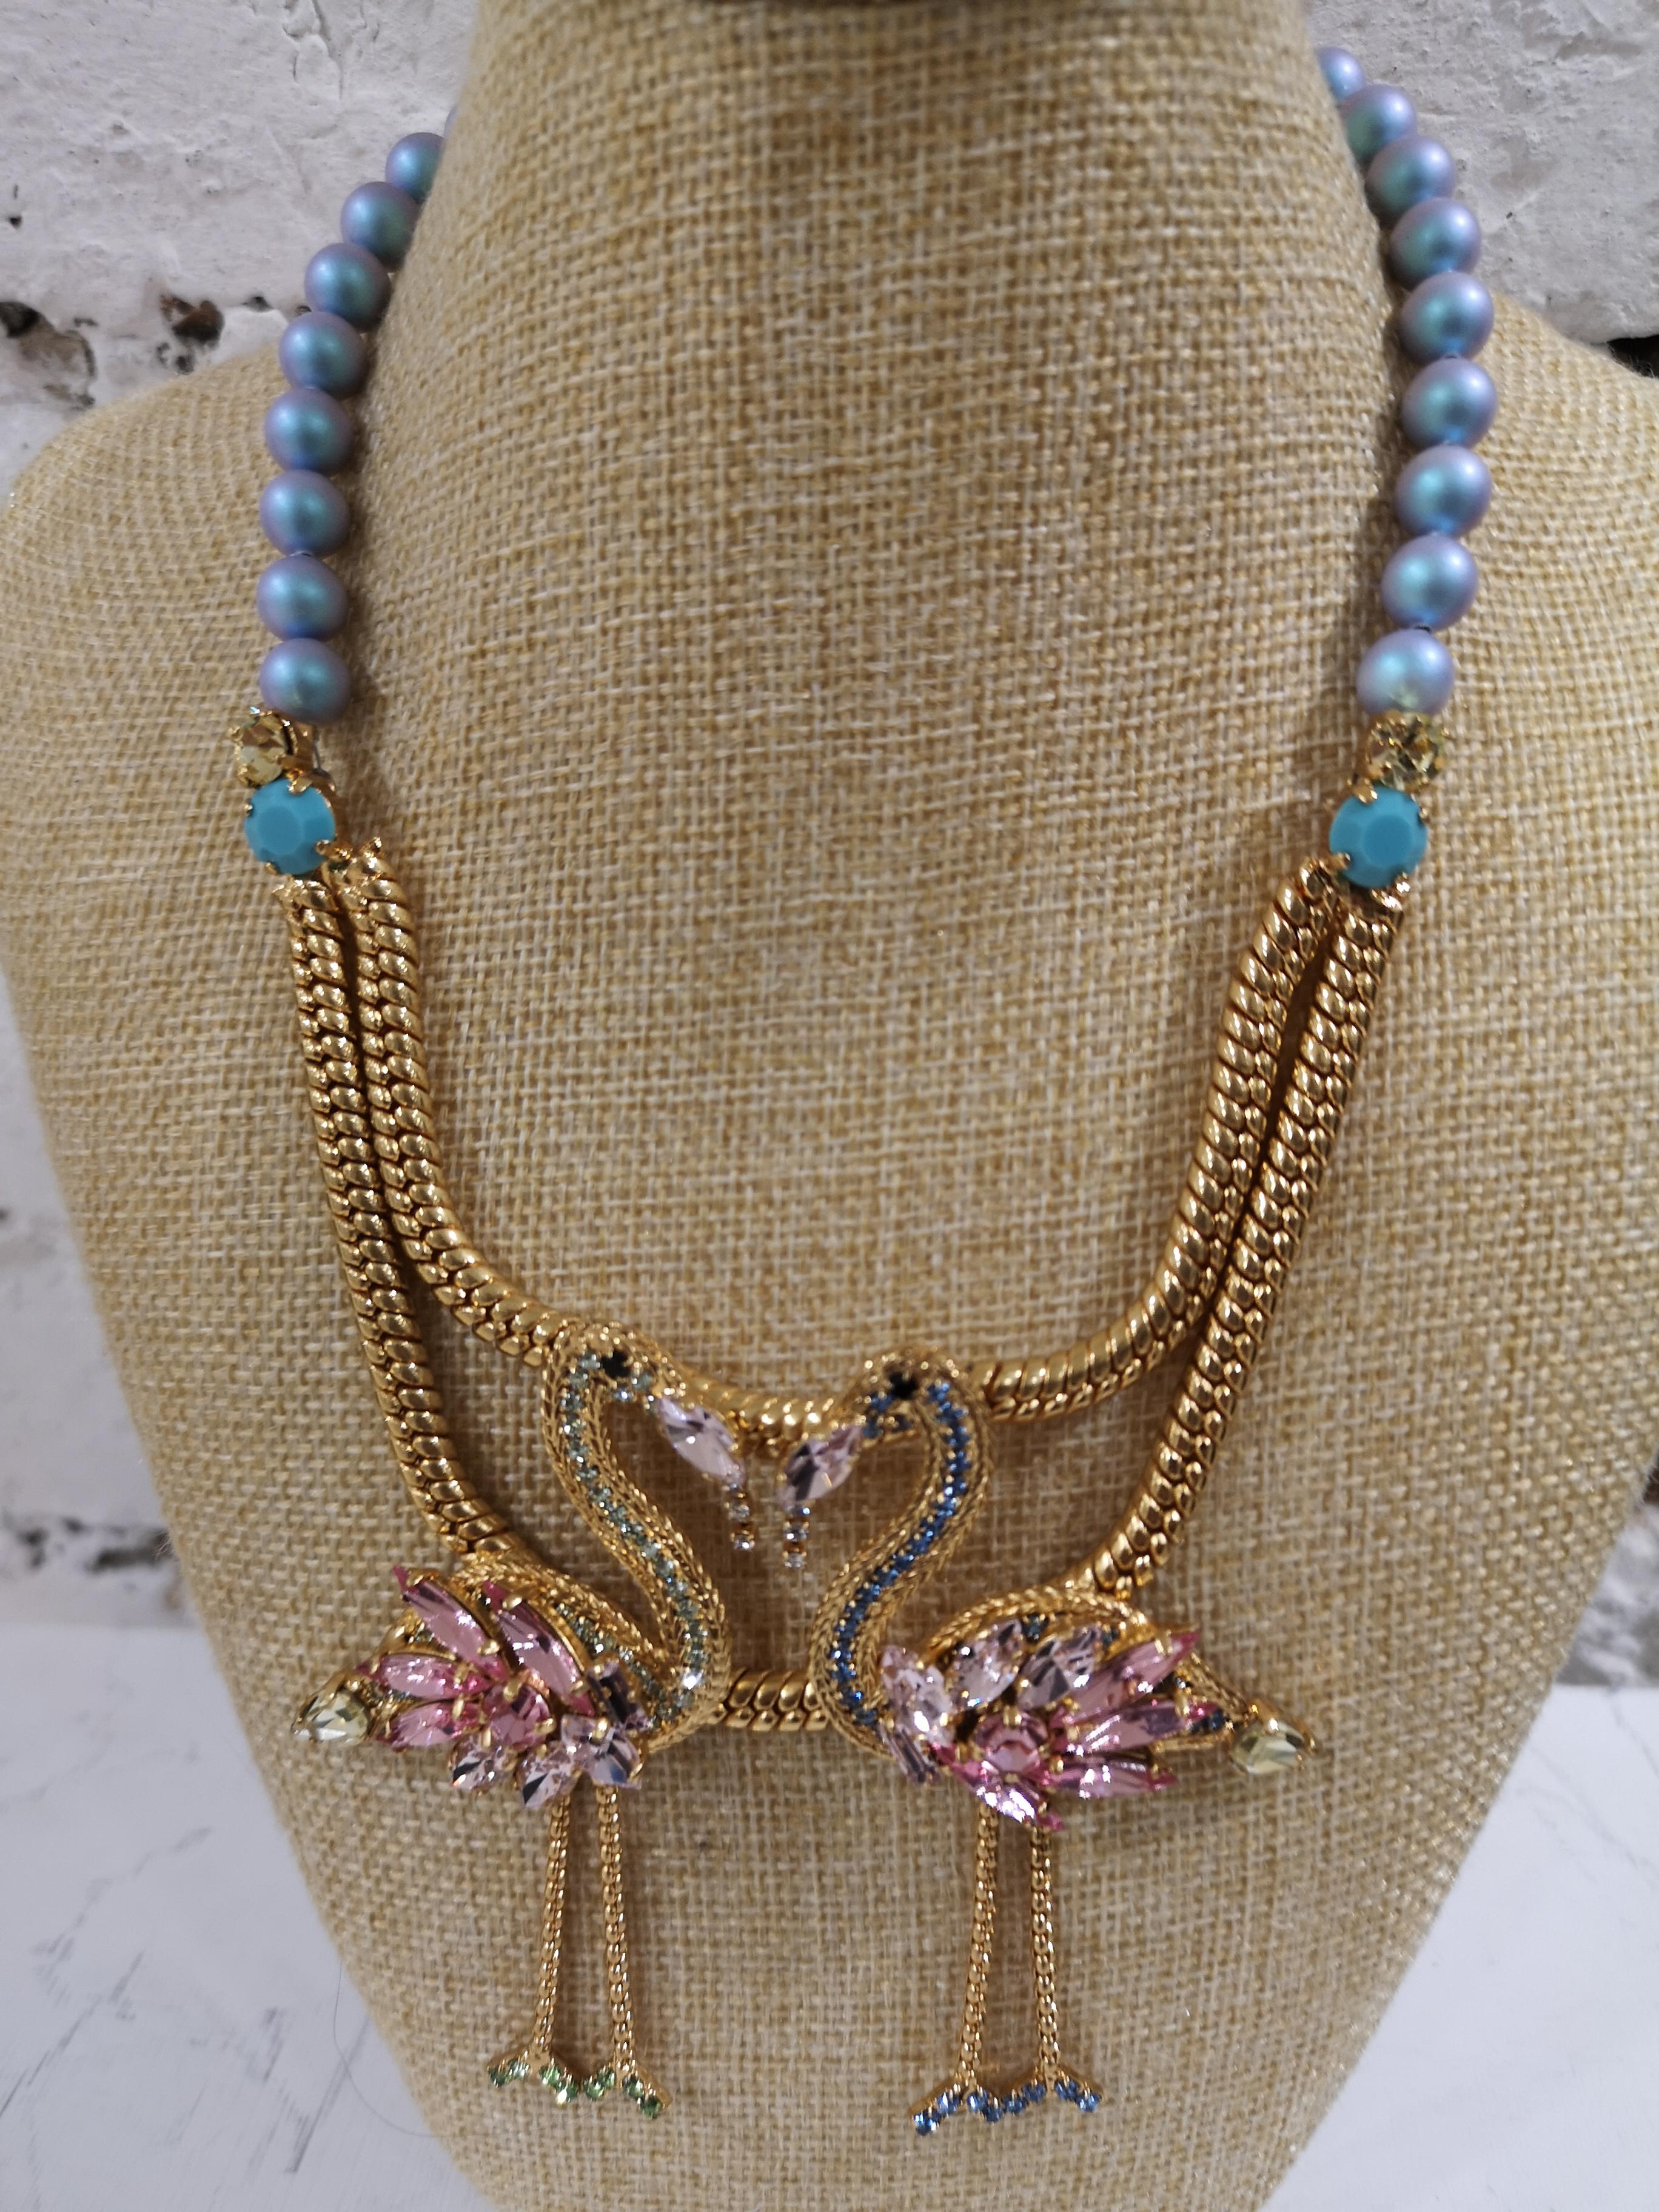 LisaC Flamingos light blue pearls neacklace
LisaC totally made in italy necklace embellished with two flamingos with light pink swarovski and surrounded by light blue faux pearls necklace on a rose gold tone brass necklace
total lenght from 37 cm up